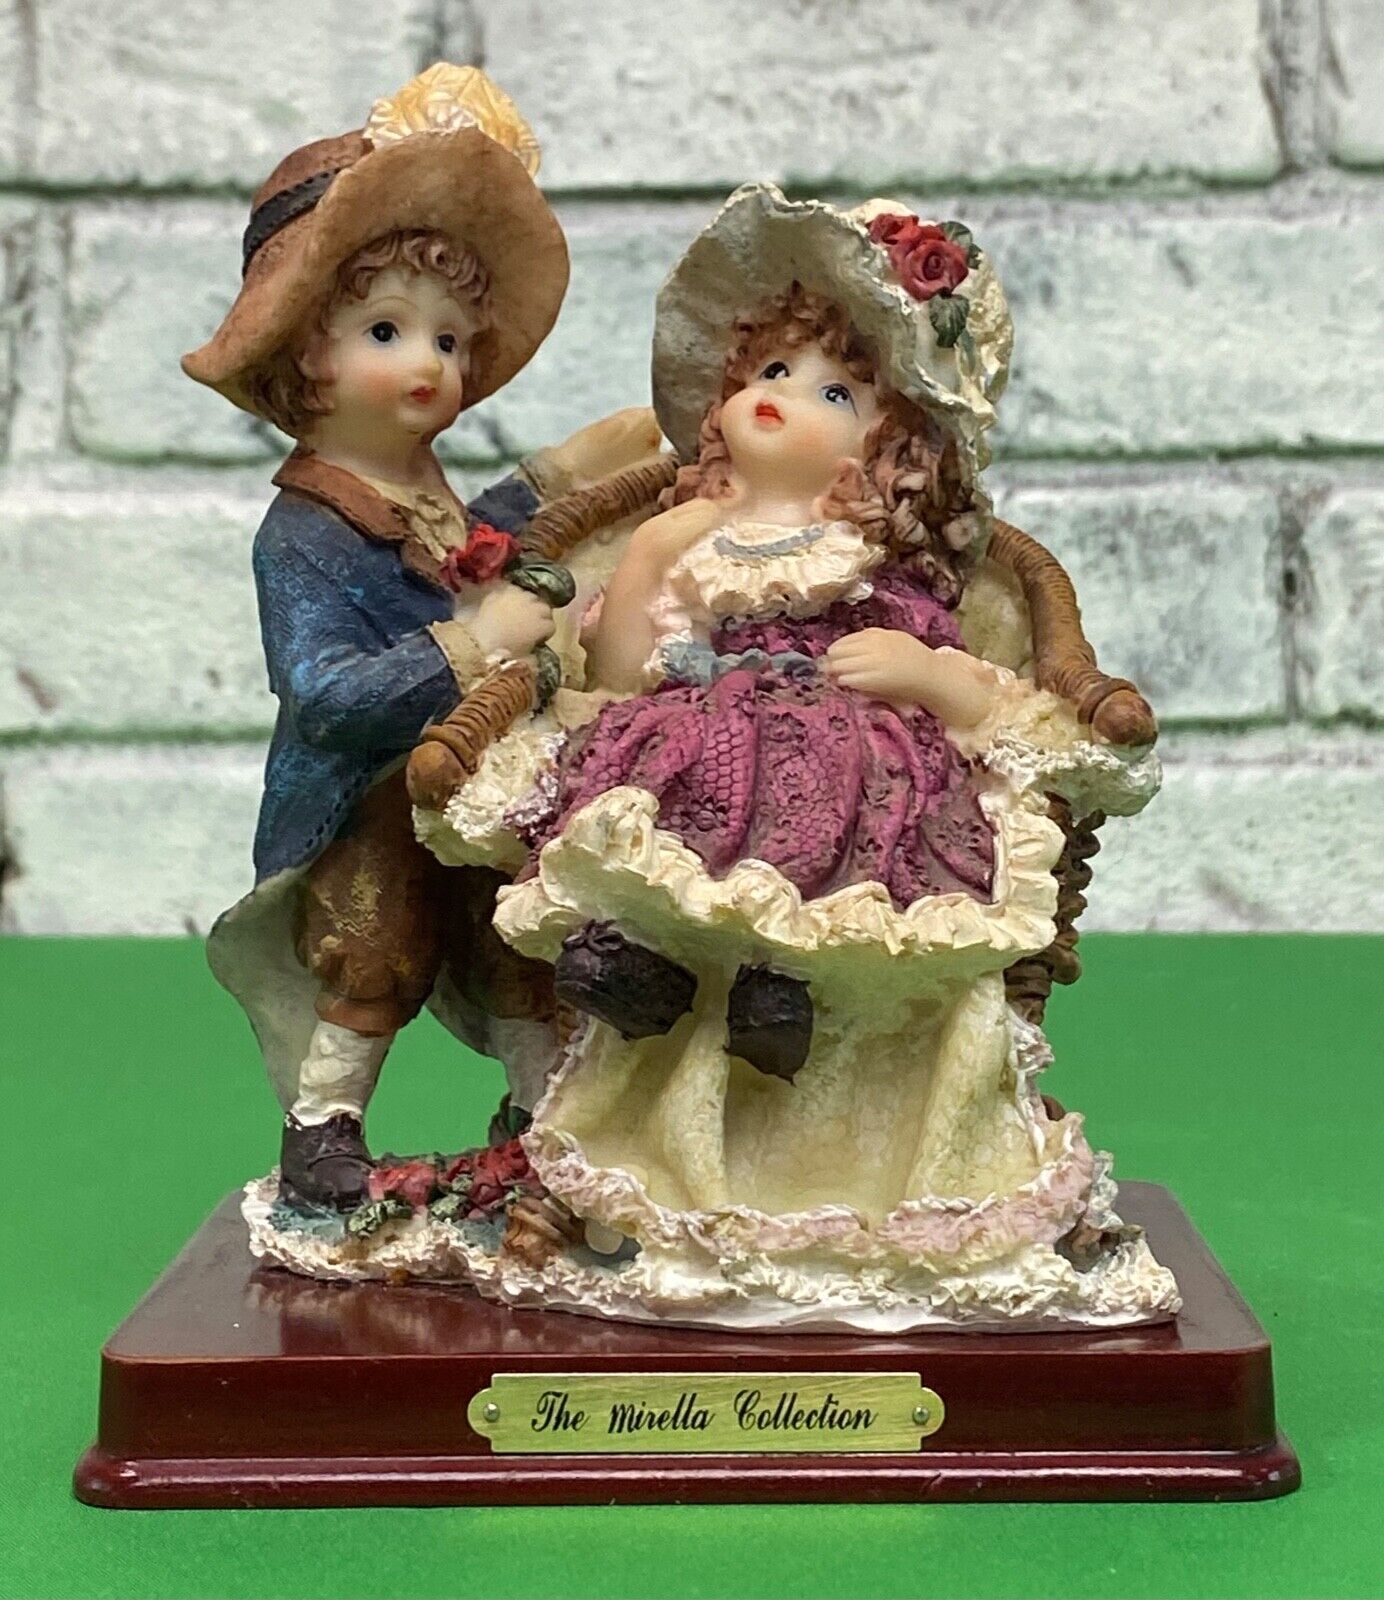 Vintage Rare Figurine The Mirella Collection Young Love in Italy on Wooden Base